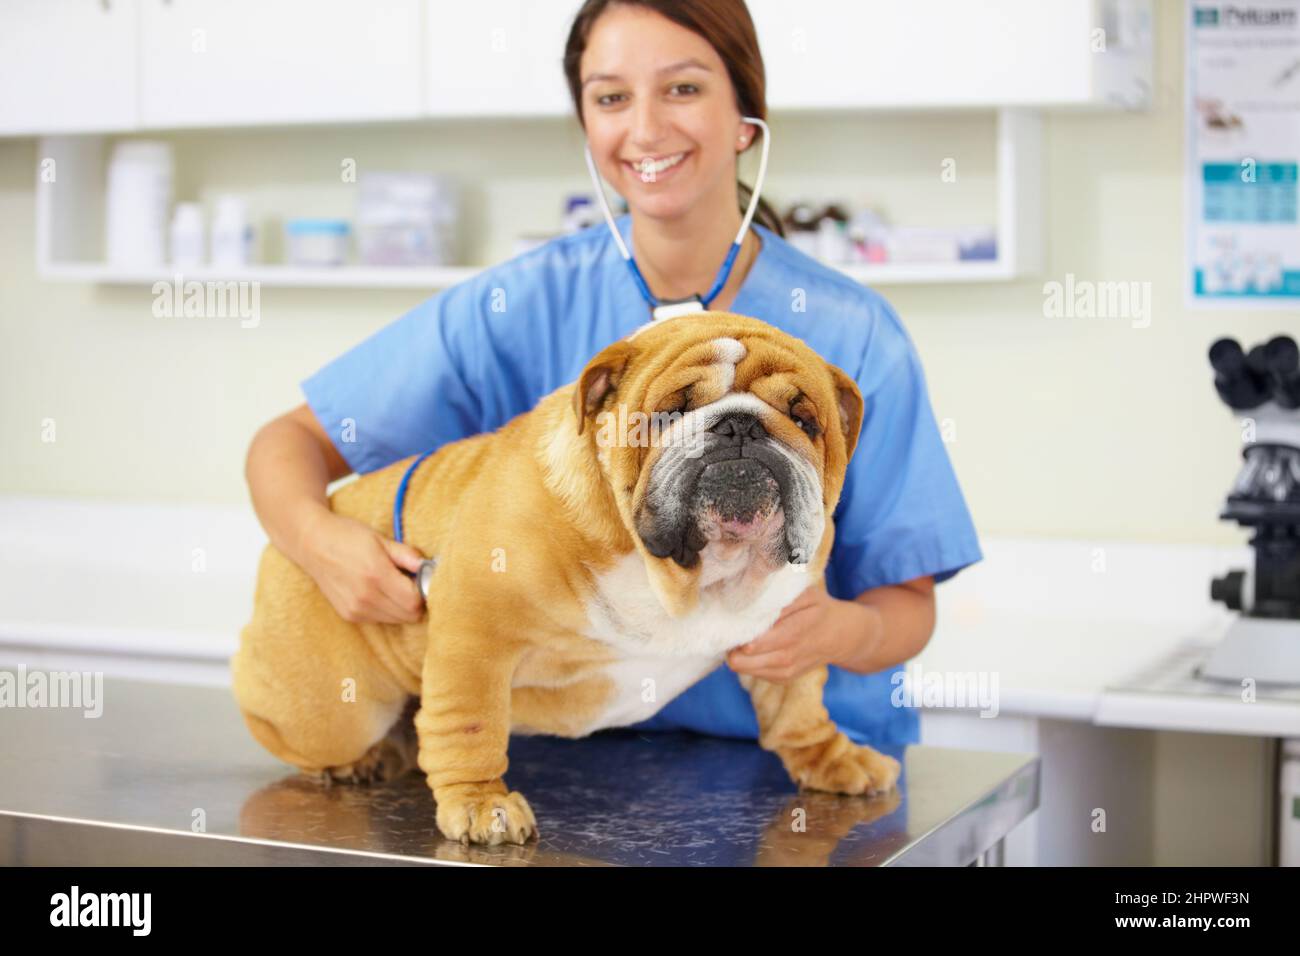 Hes a big healthy boy. Portrait of a young vet examining a large bulldog sitting on an examination table. Stock Photo